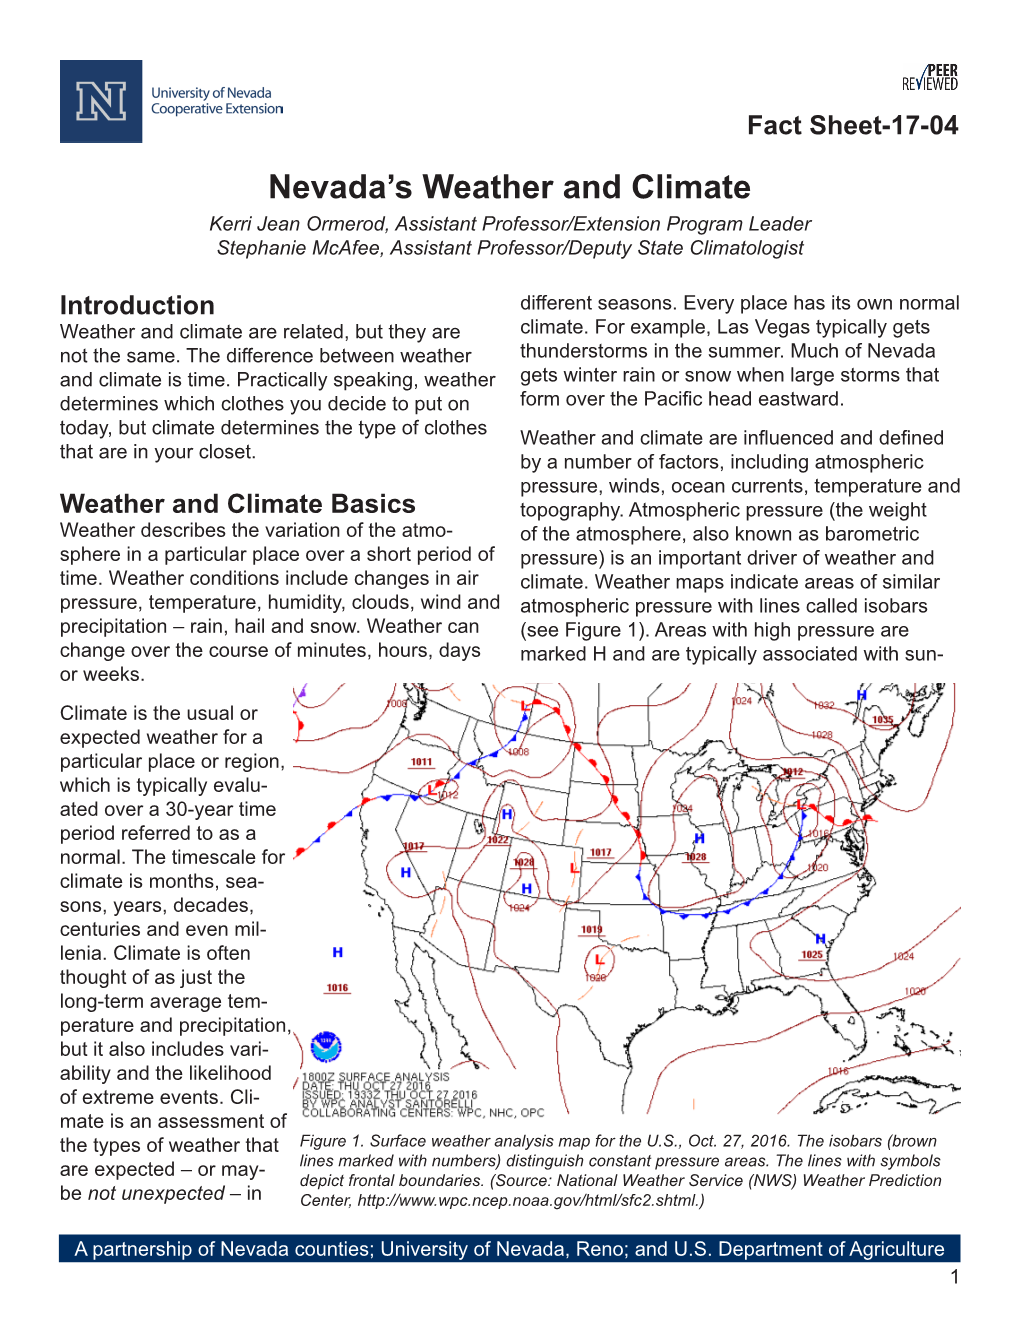 Nevada's Weather and Climate